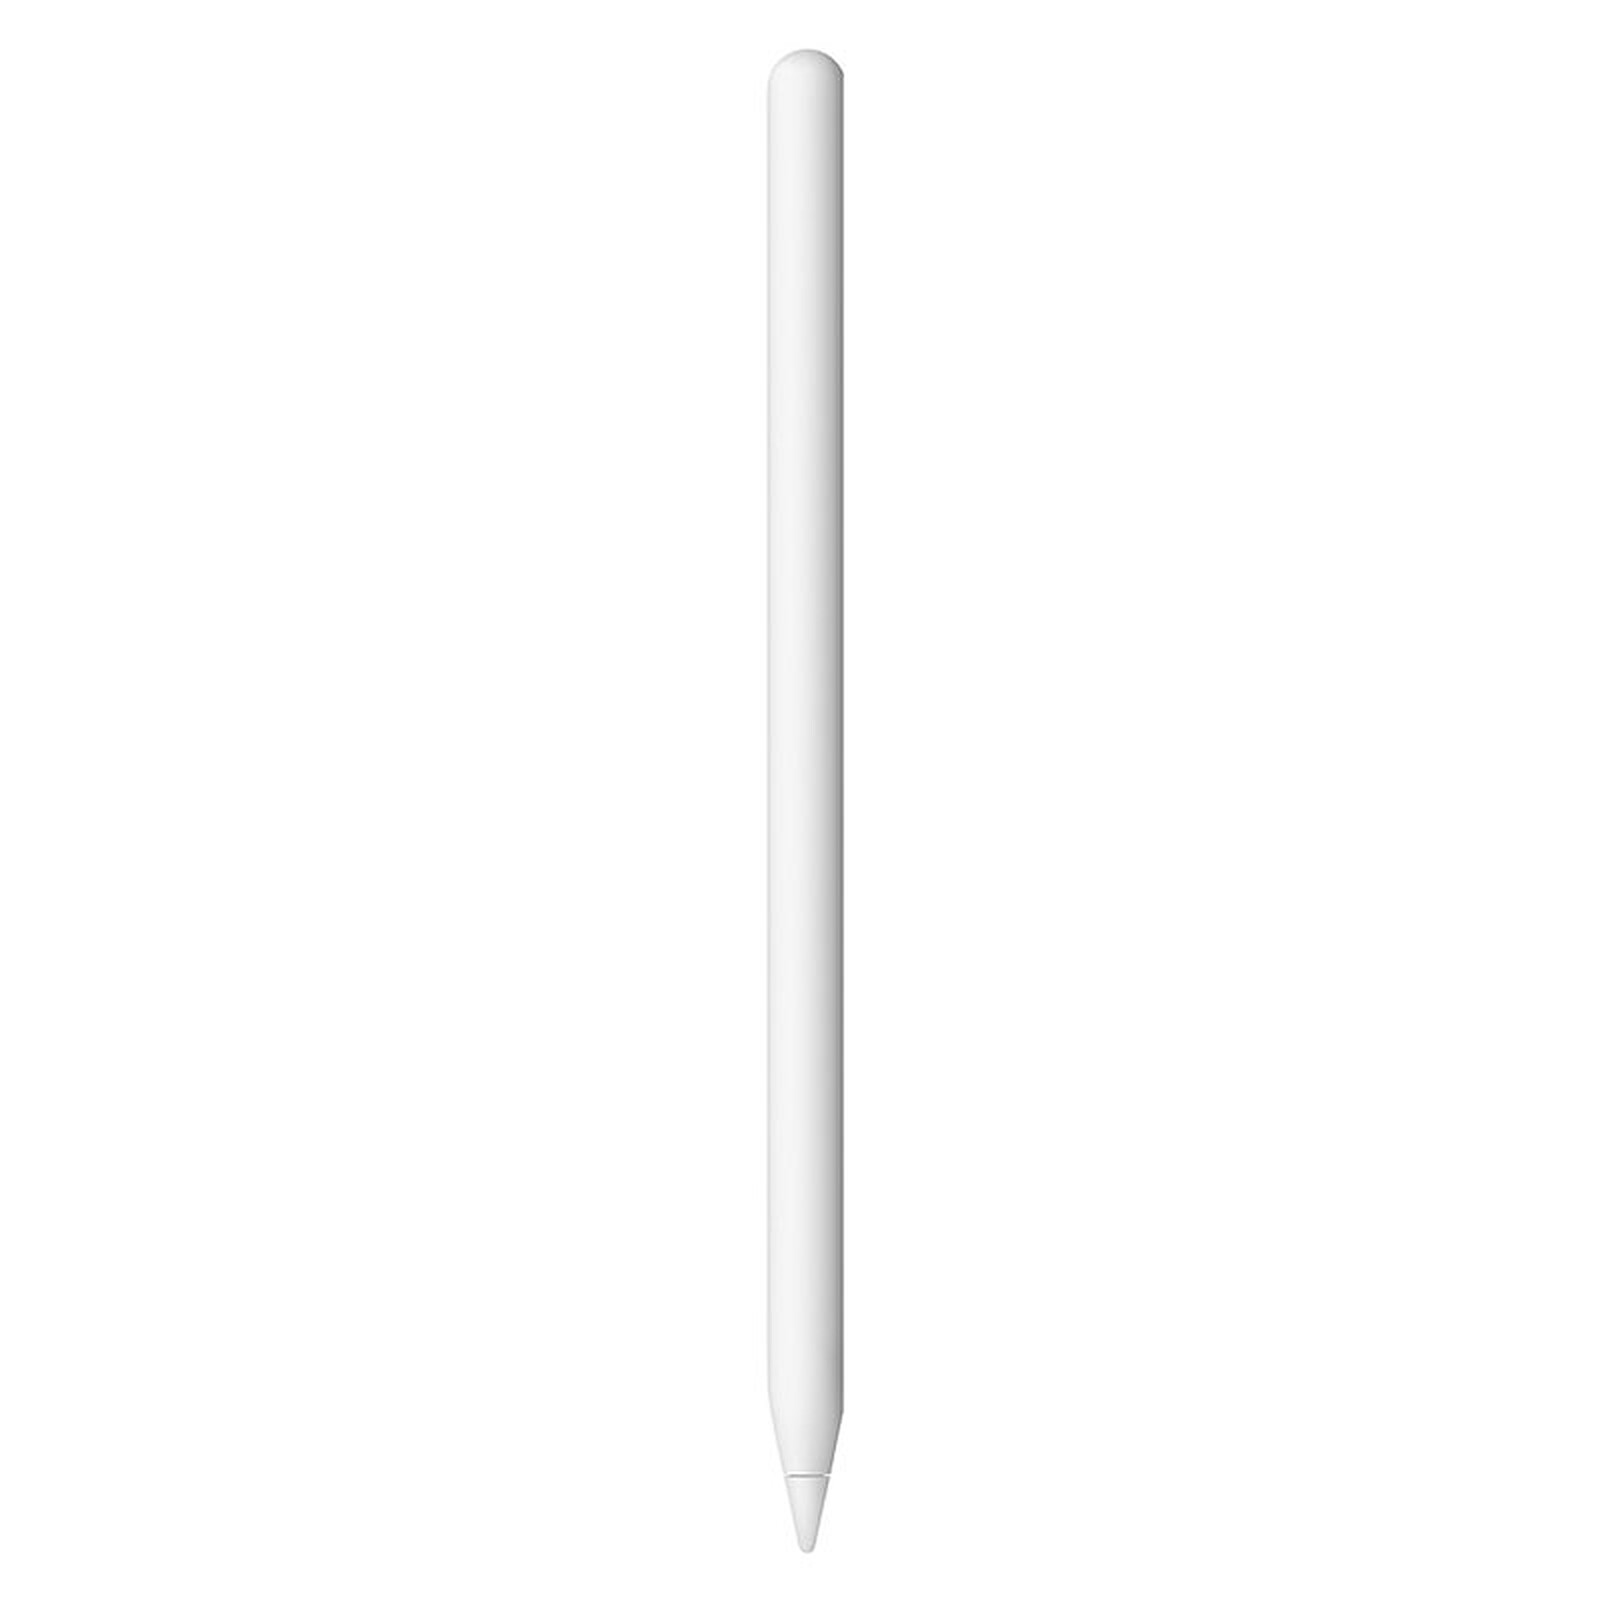 Apple Pencil (2nd generation) for iPad Pro 11 and 12.9 (2018)